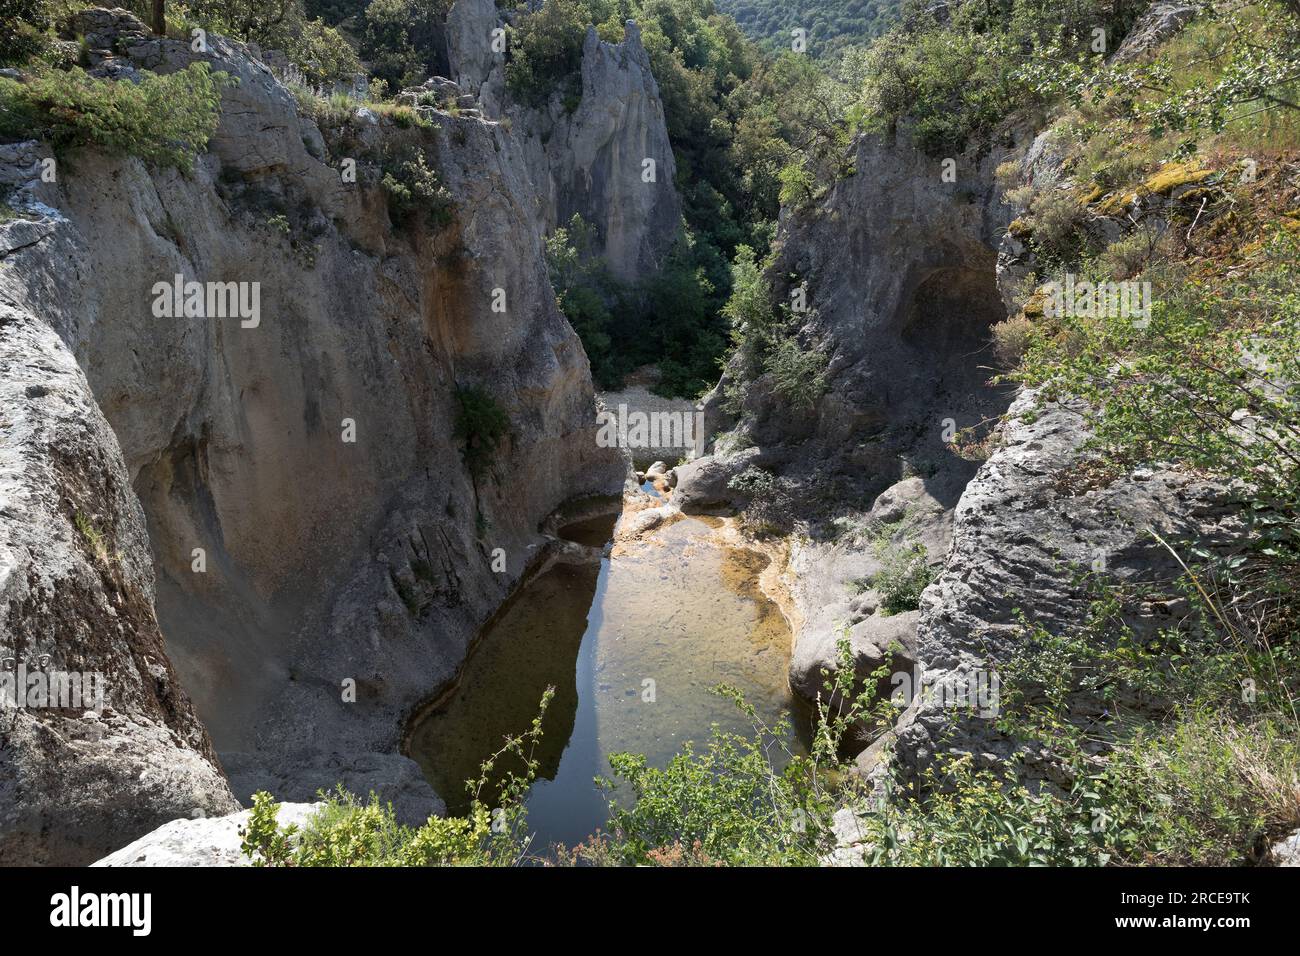 The Gour del la Sompe Gorge and Cascade in the Dry Season, Lagorce, France. Stock Photo